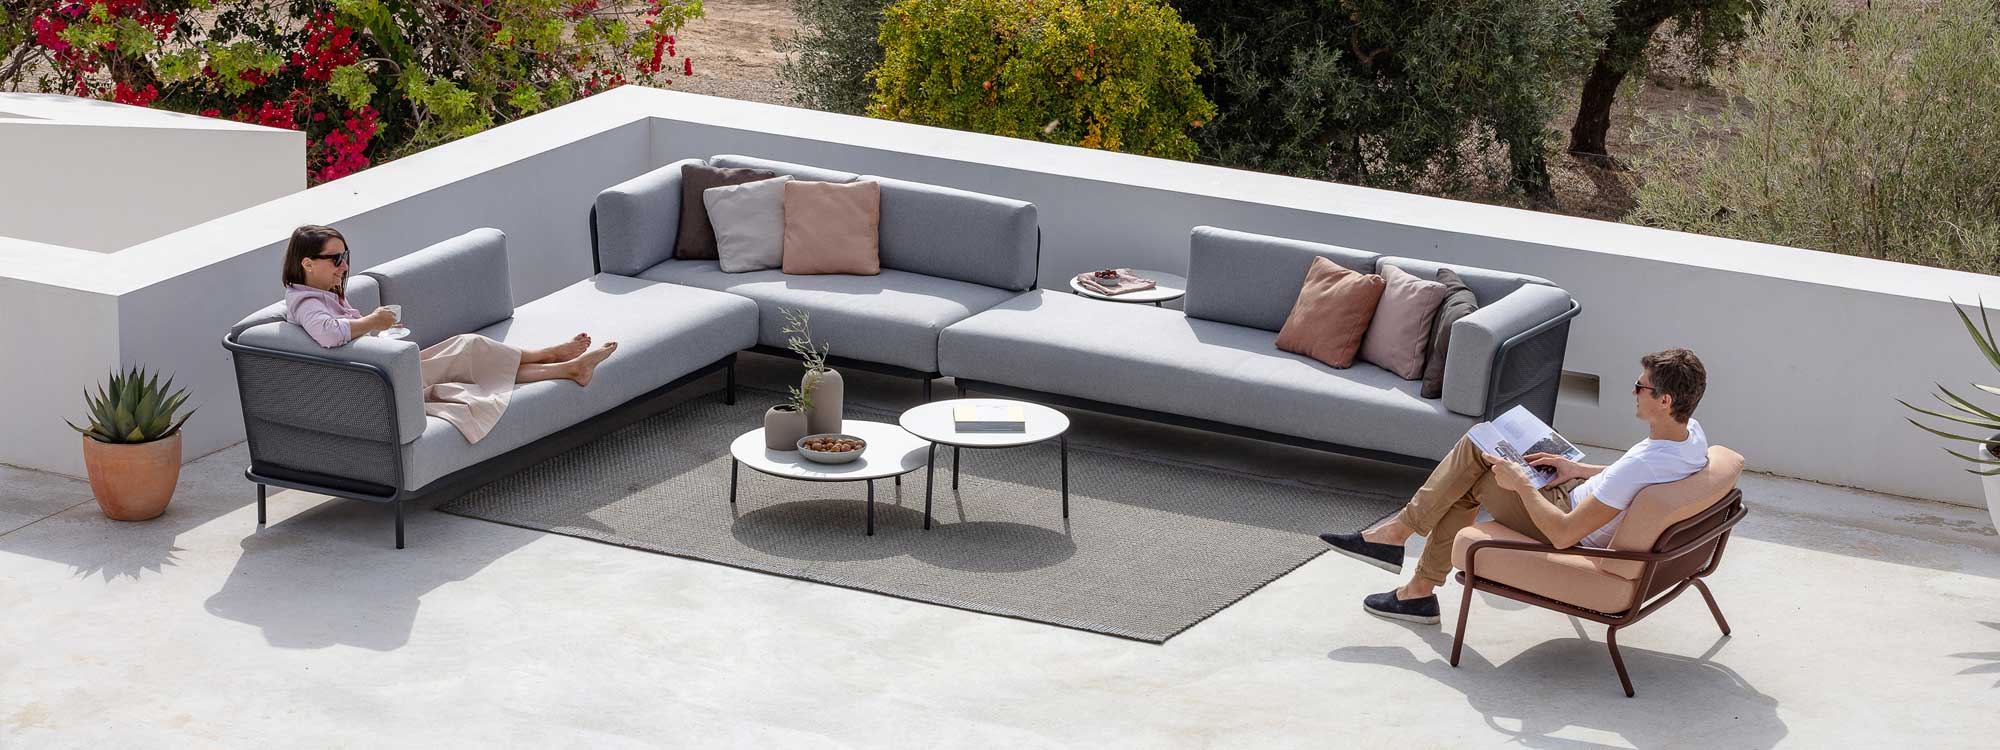 Baza garden corner sofa and Starling outdoor lounge chair & low tables by Todu